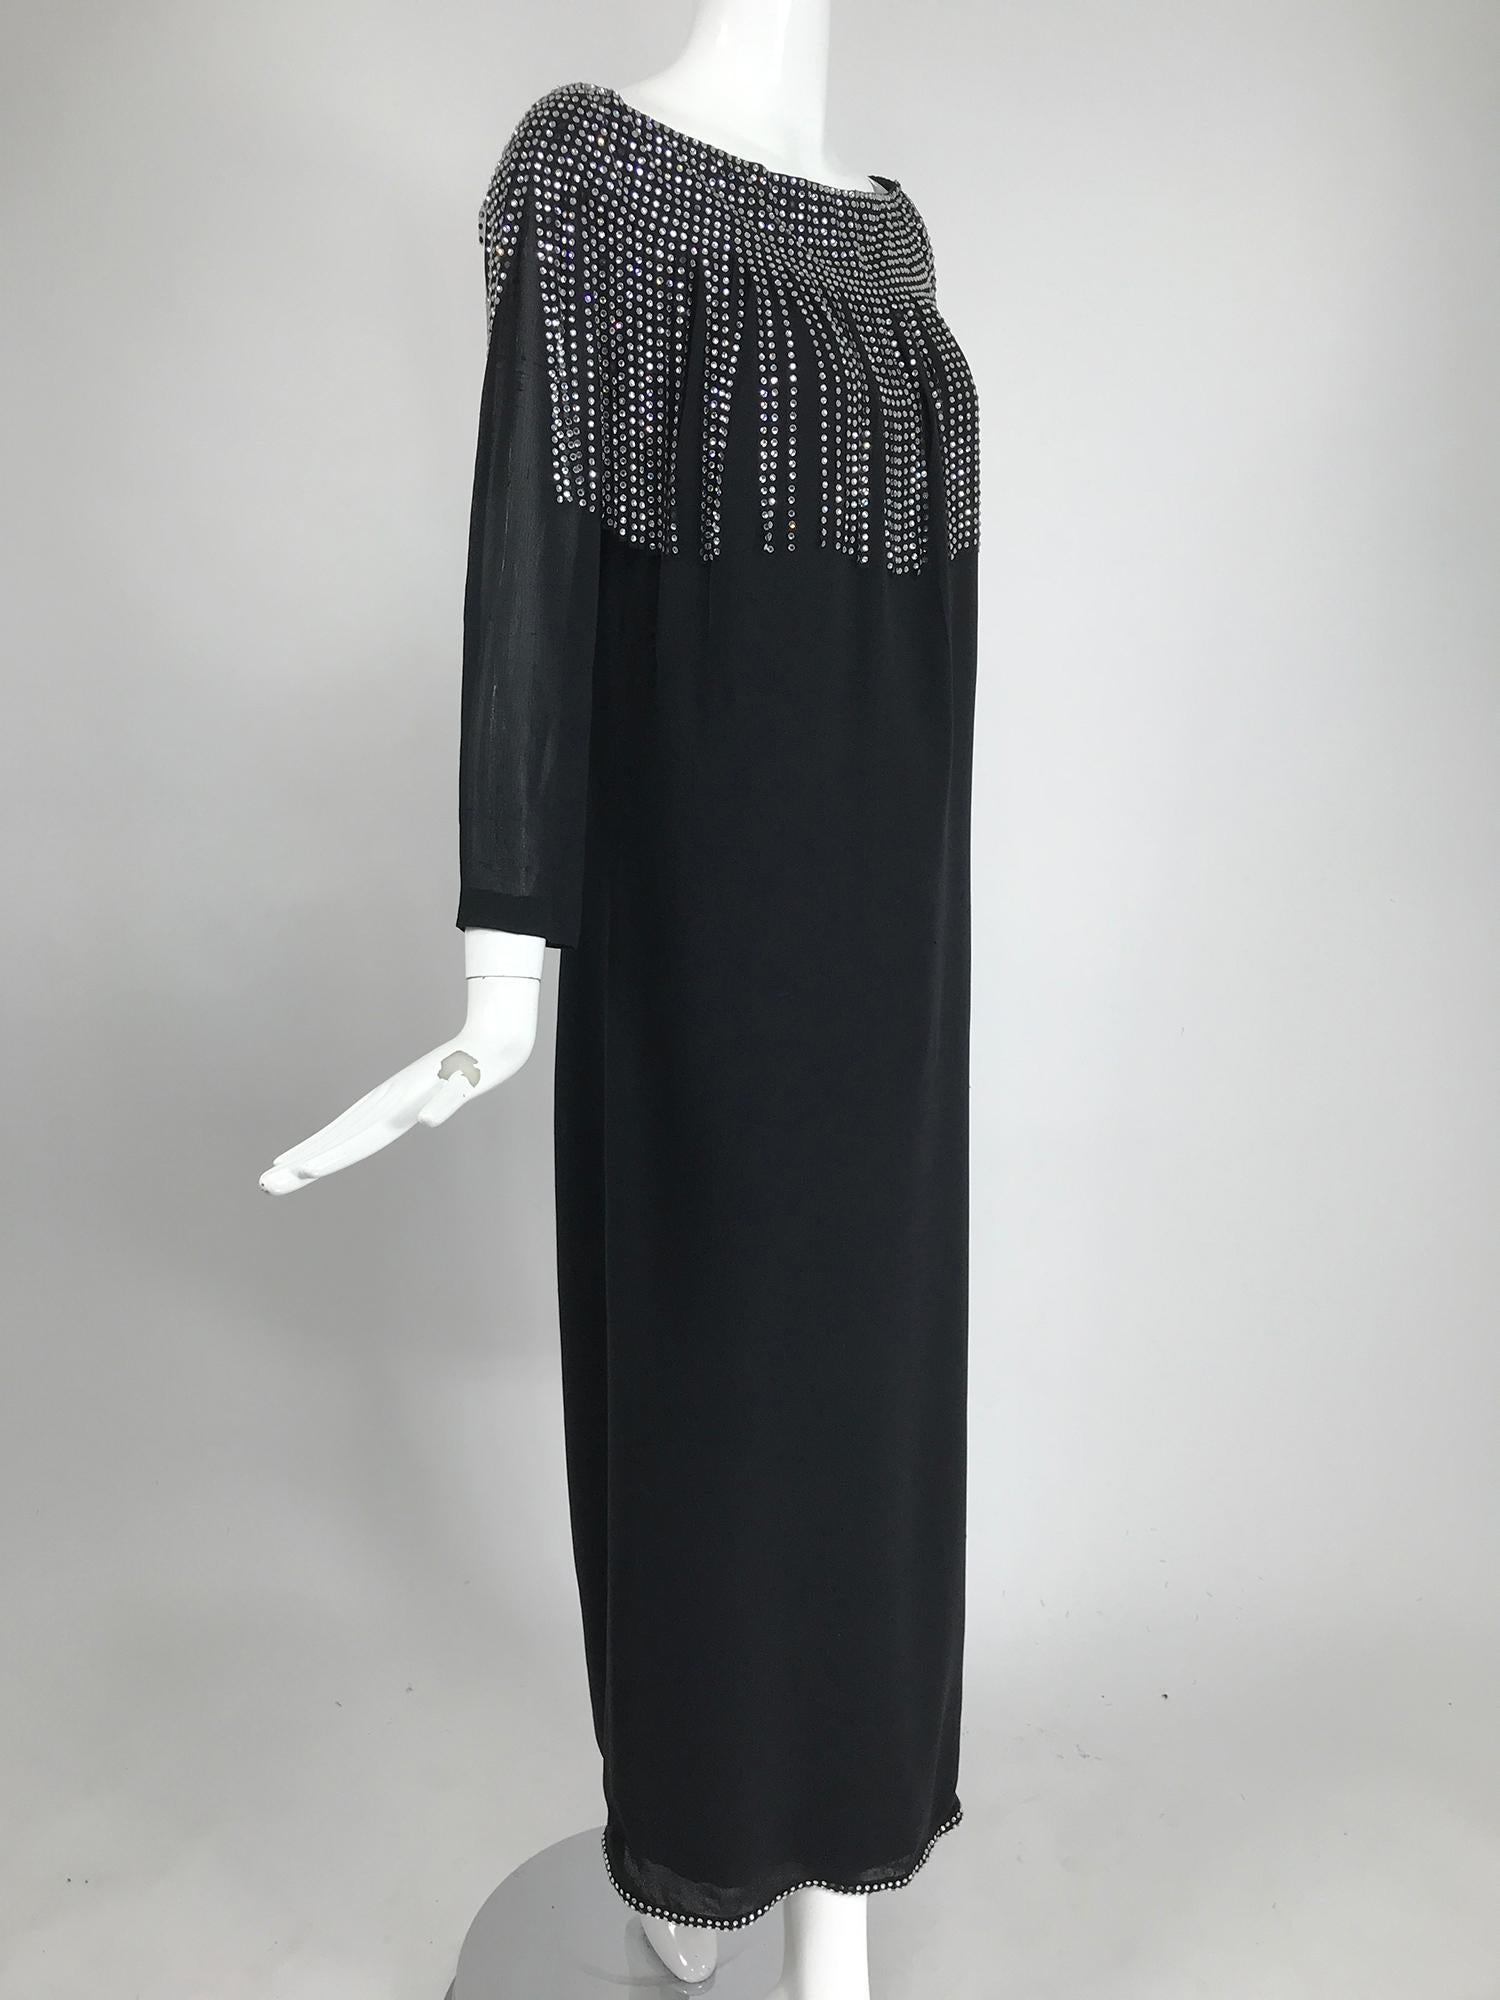 Pierre Cardin Couture black slub silk gown with rhinestone car wash bib, from the 1960s. A simple and elegant long sleeve column gown that tapers from the wide neckline to a narrow hem that has a double row of rhinestones. The dress is hand made.